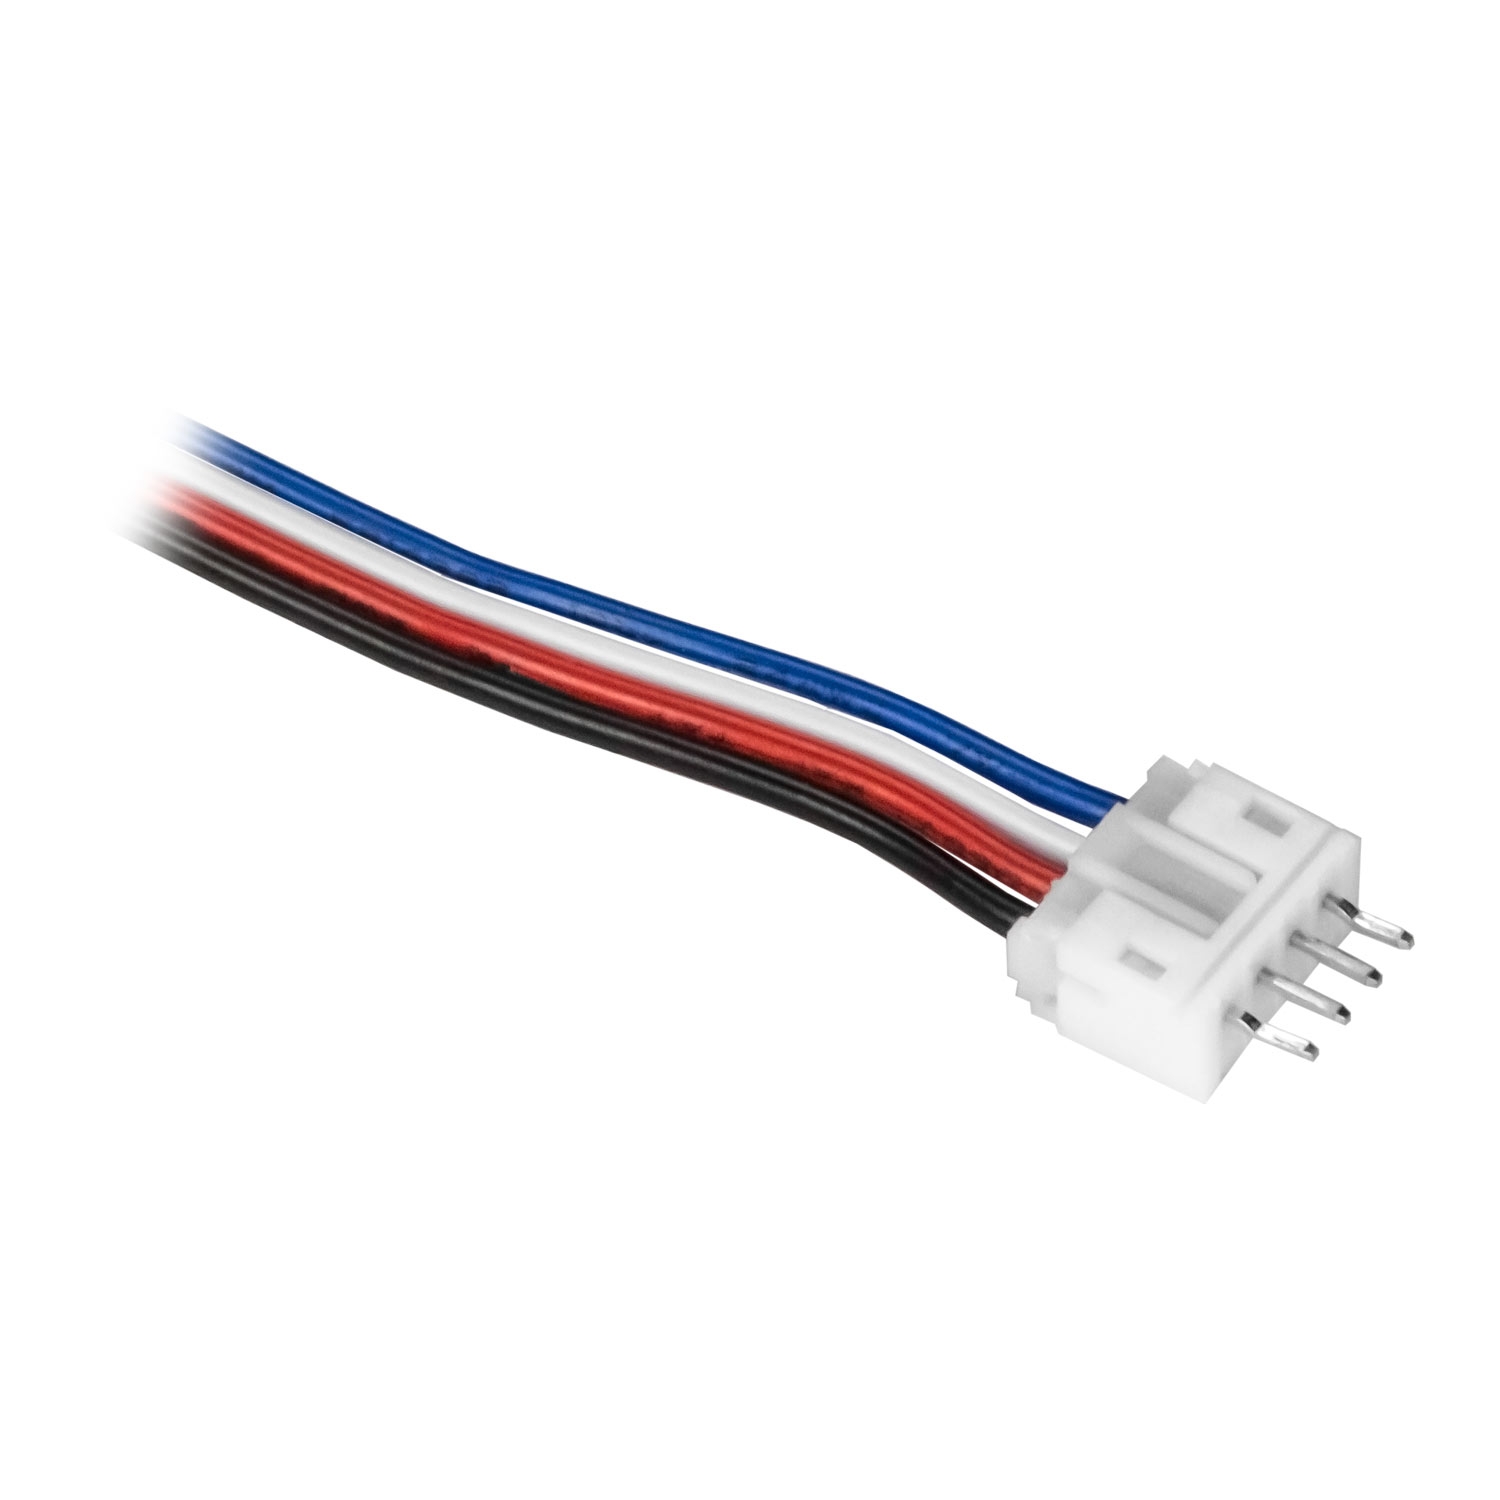 JST-PHR-4 to 4-Pin 0.1 in. Female Adapter Cable - AndyMark, Inc